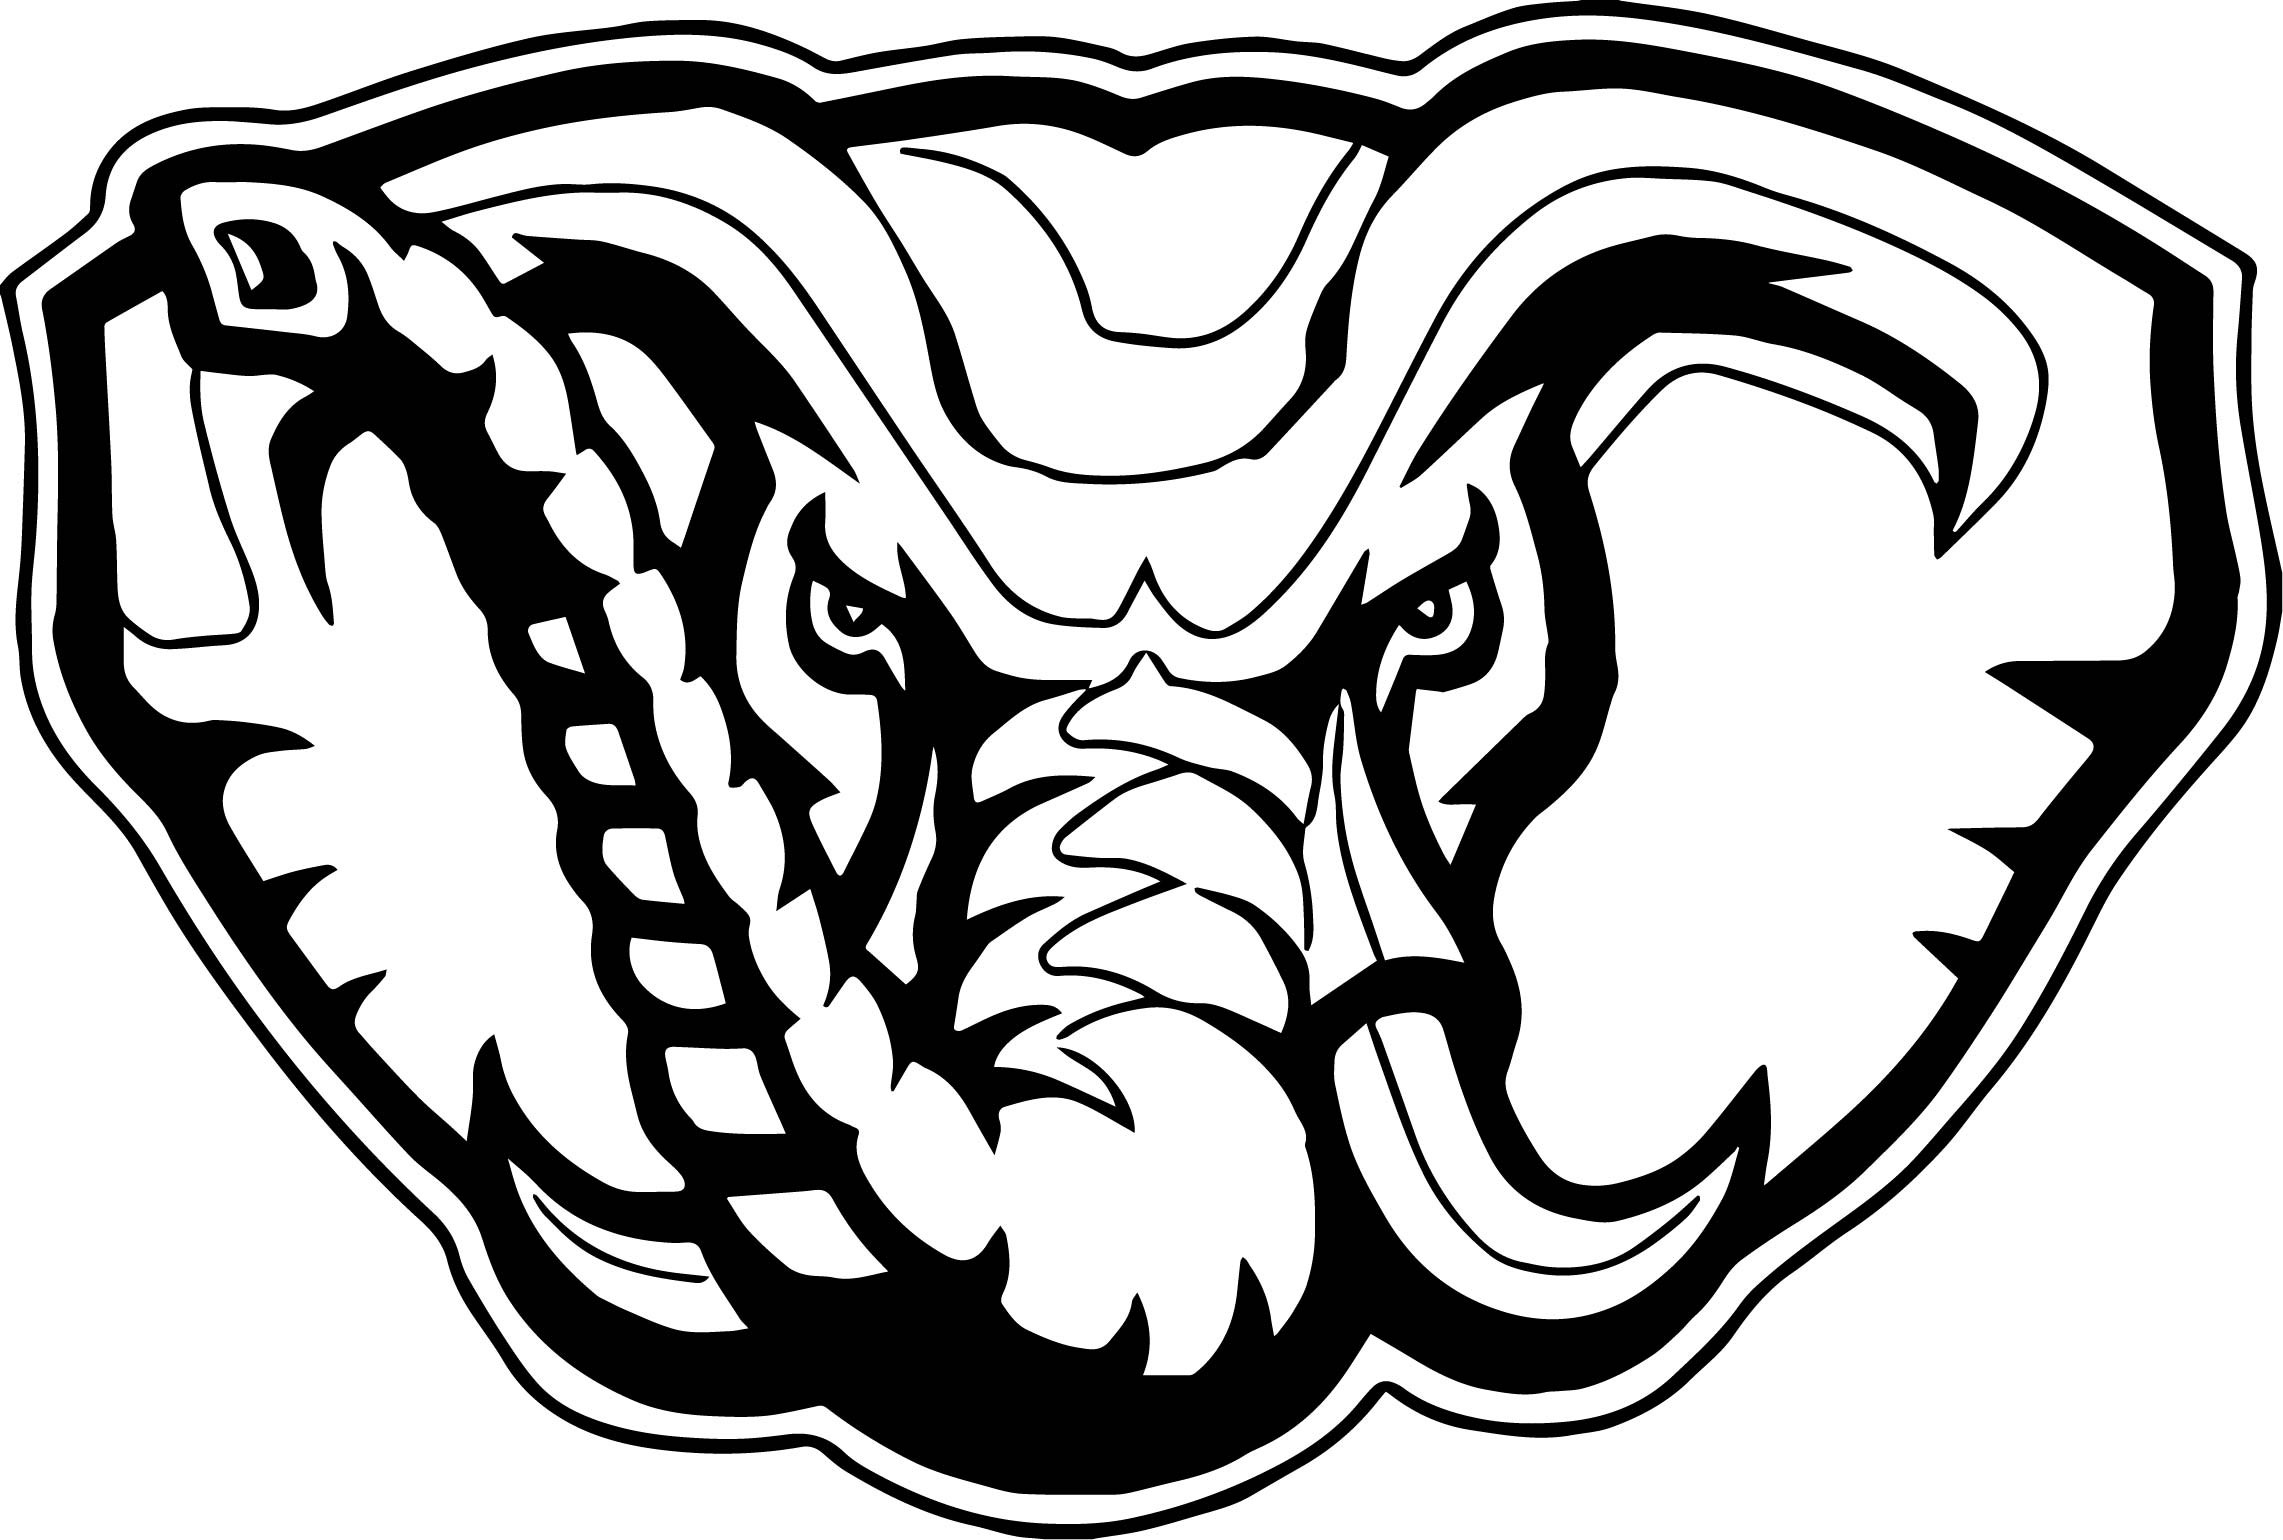 Alabama Football Coloring Pages
 Elephant Football Logo Alabama Crimson Tide Coloring Page